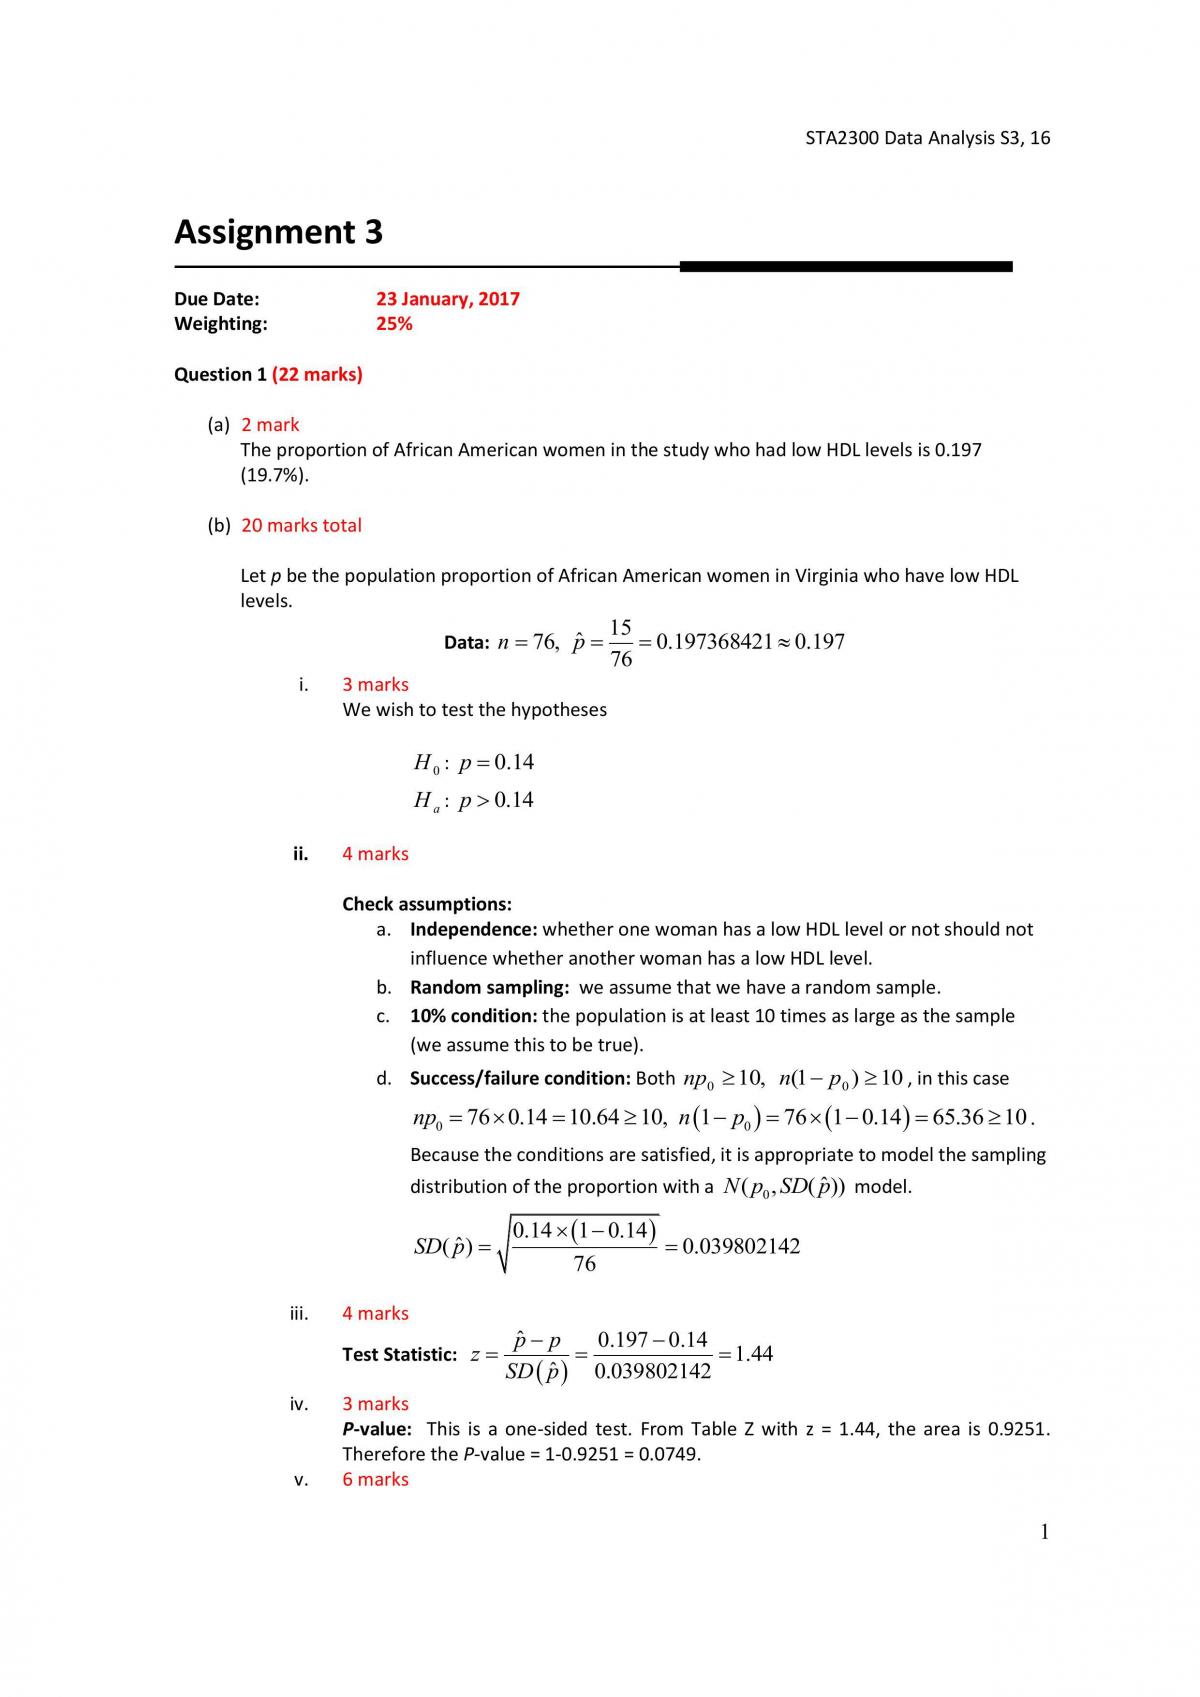 STA2300 Assignment 3 Marks - Page 1